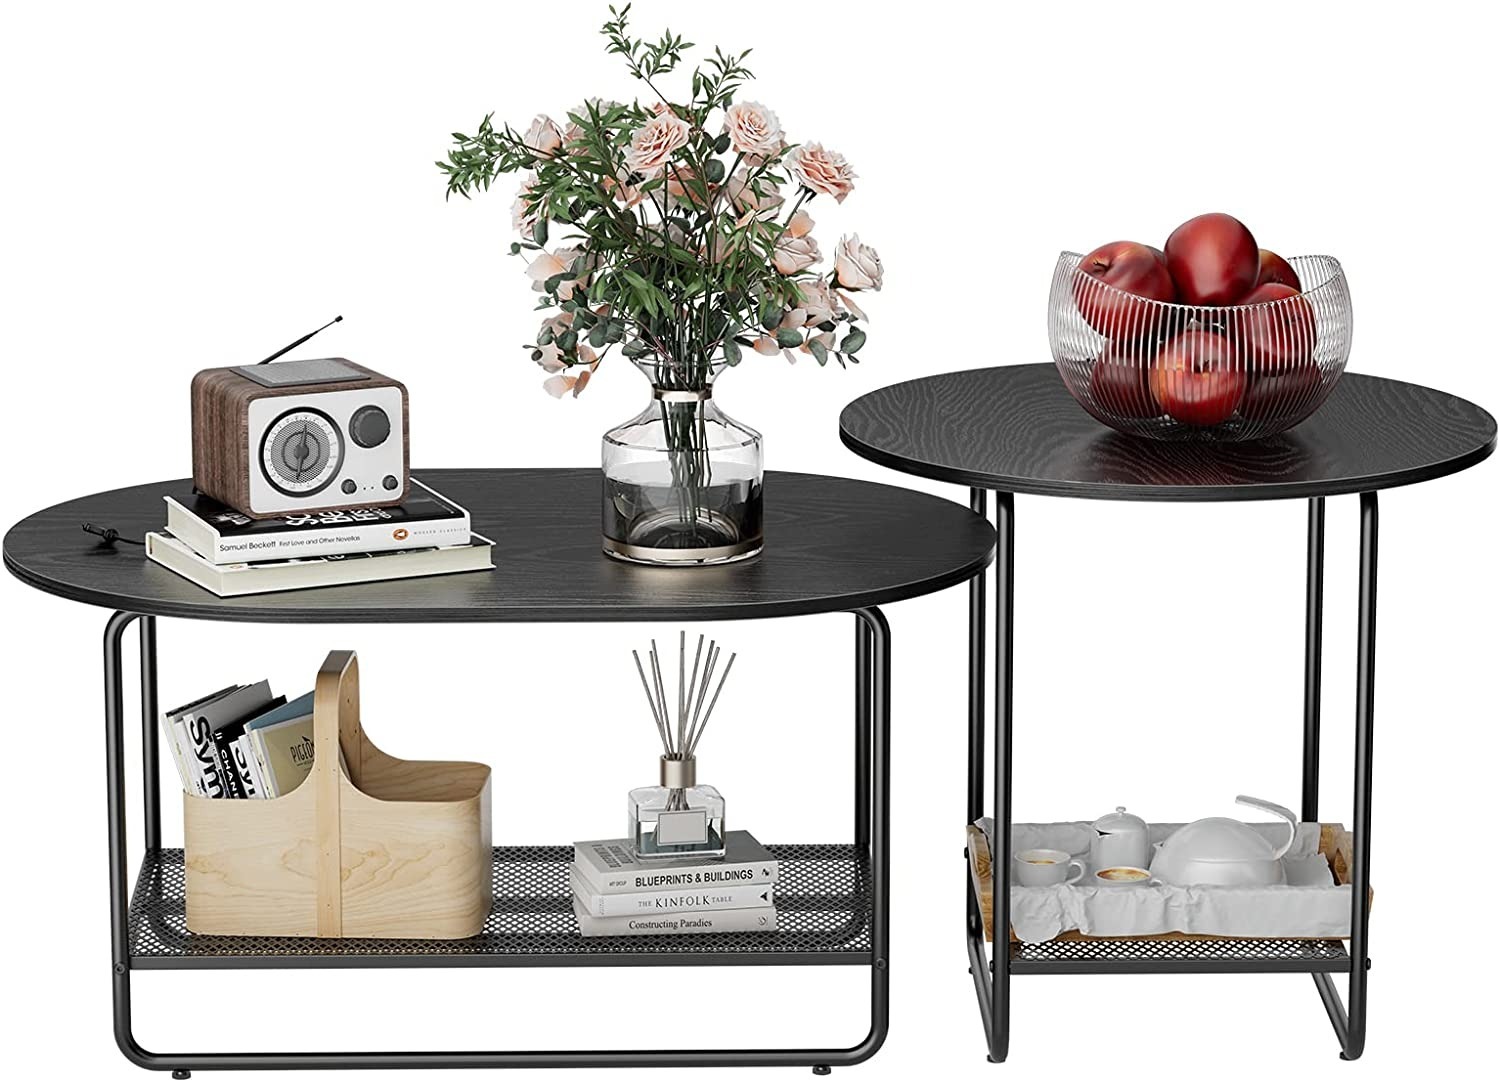 Set of 2 Amada 2-Tier Coffee Table (Black or Brown) $40 + Free Shipping